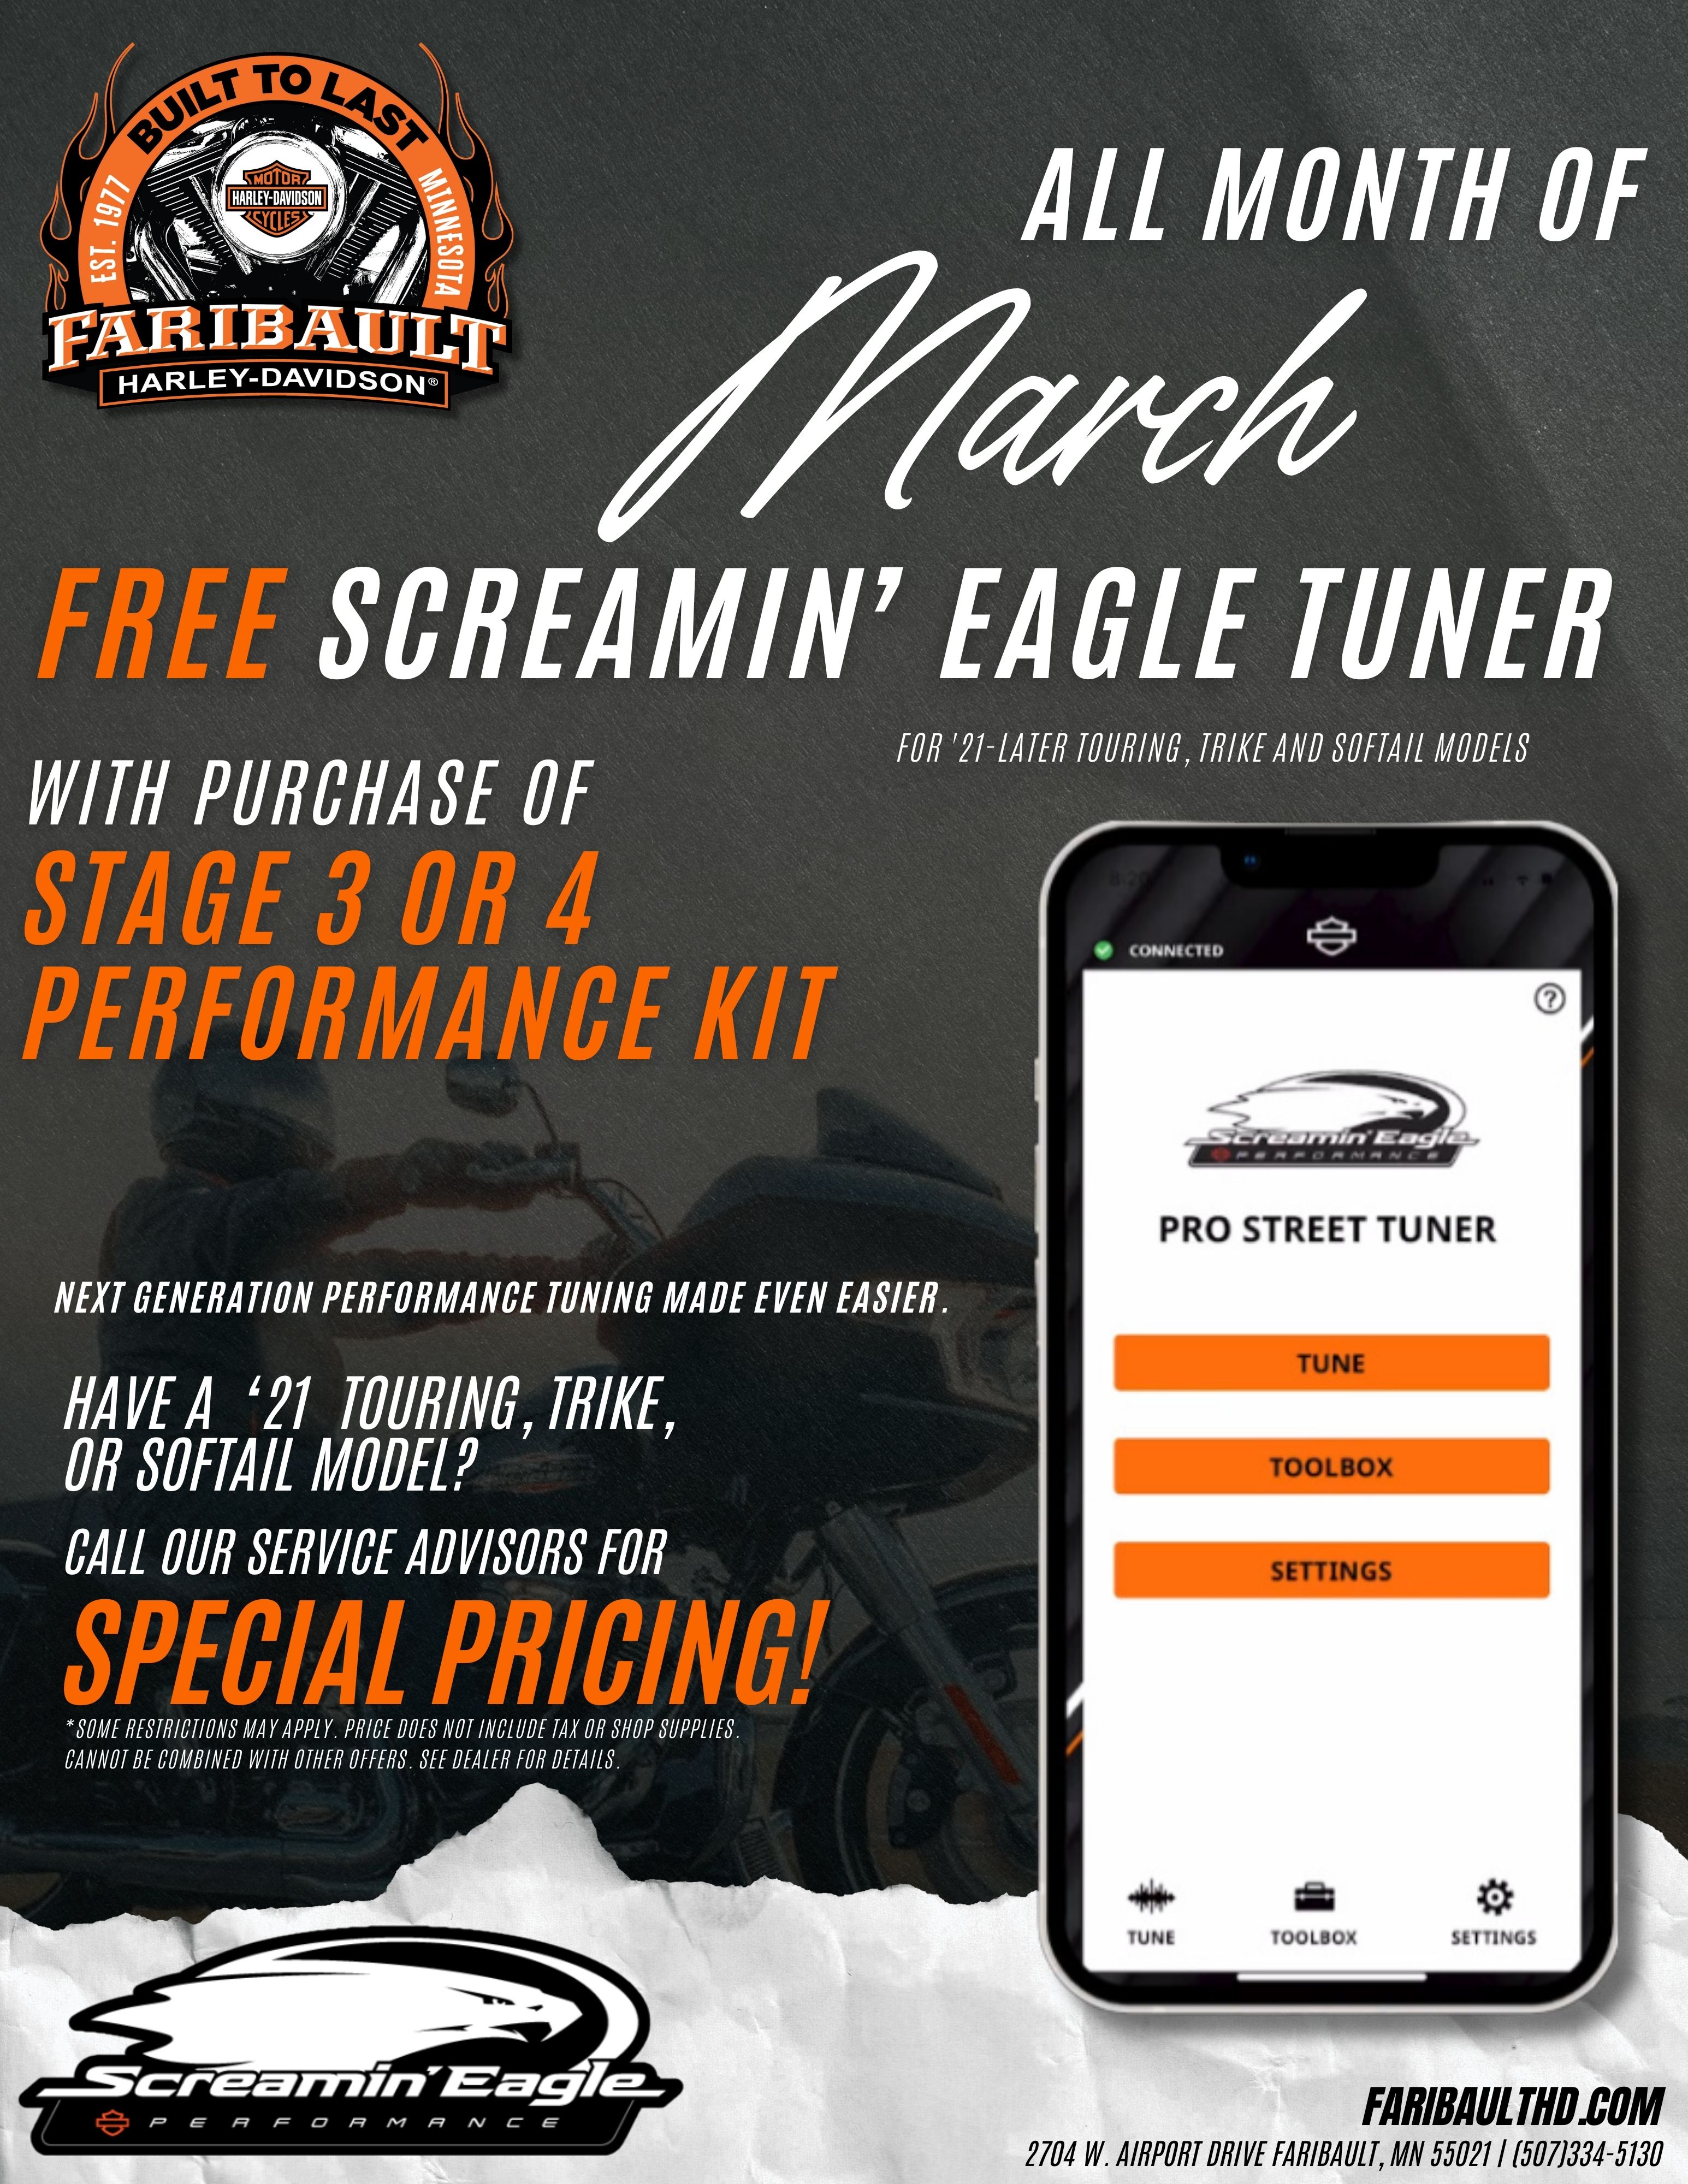 Free Screamin' Eagle Tuner with the purchase of a Stage 3 or 4 Performance Upgrade Kit this March at Faribault Harley-Davidson